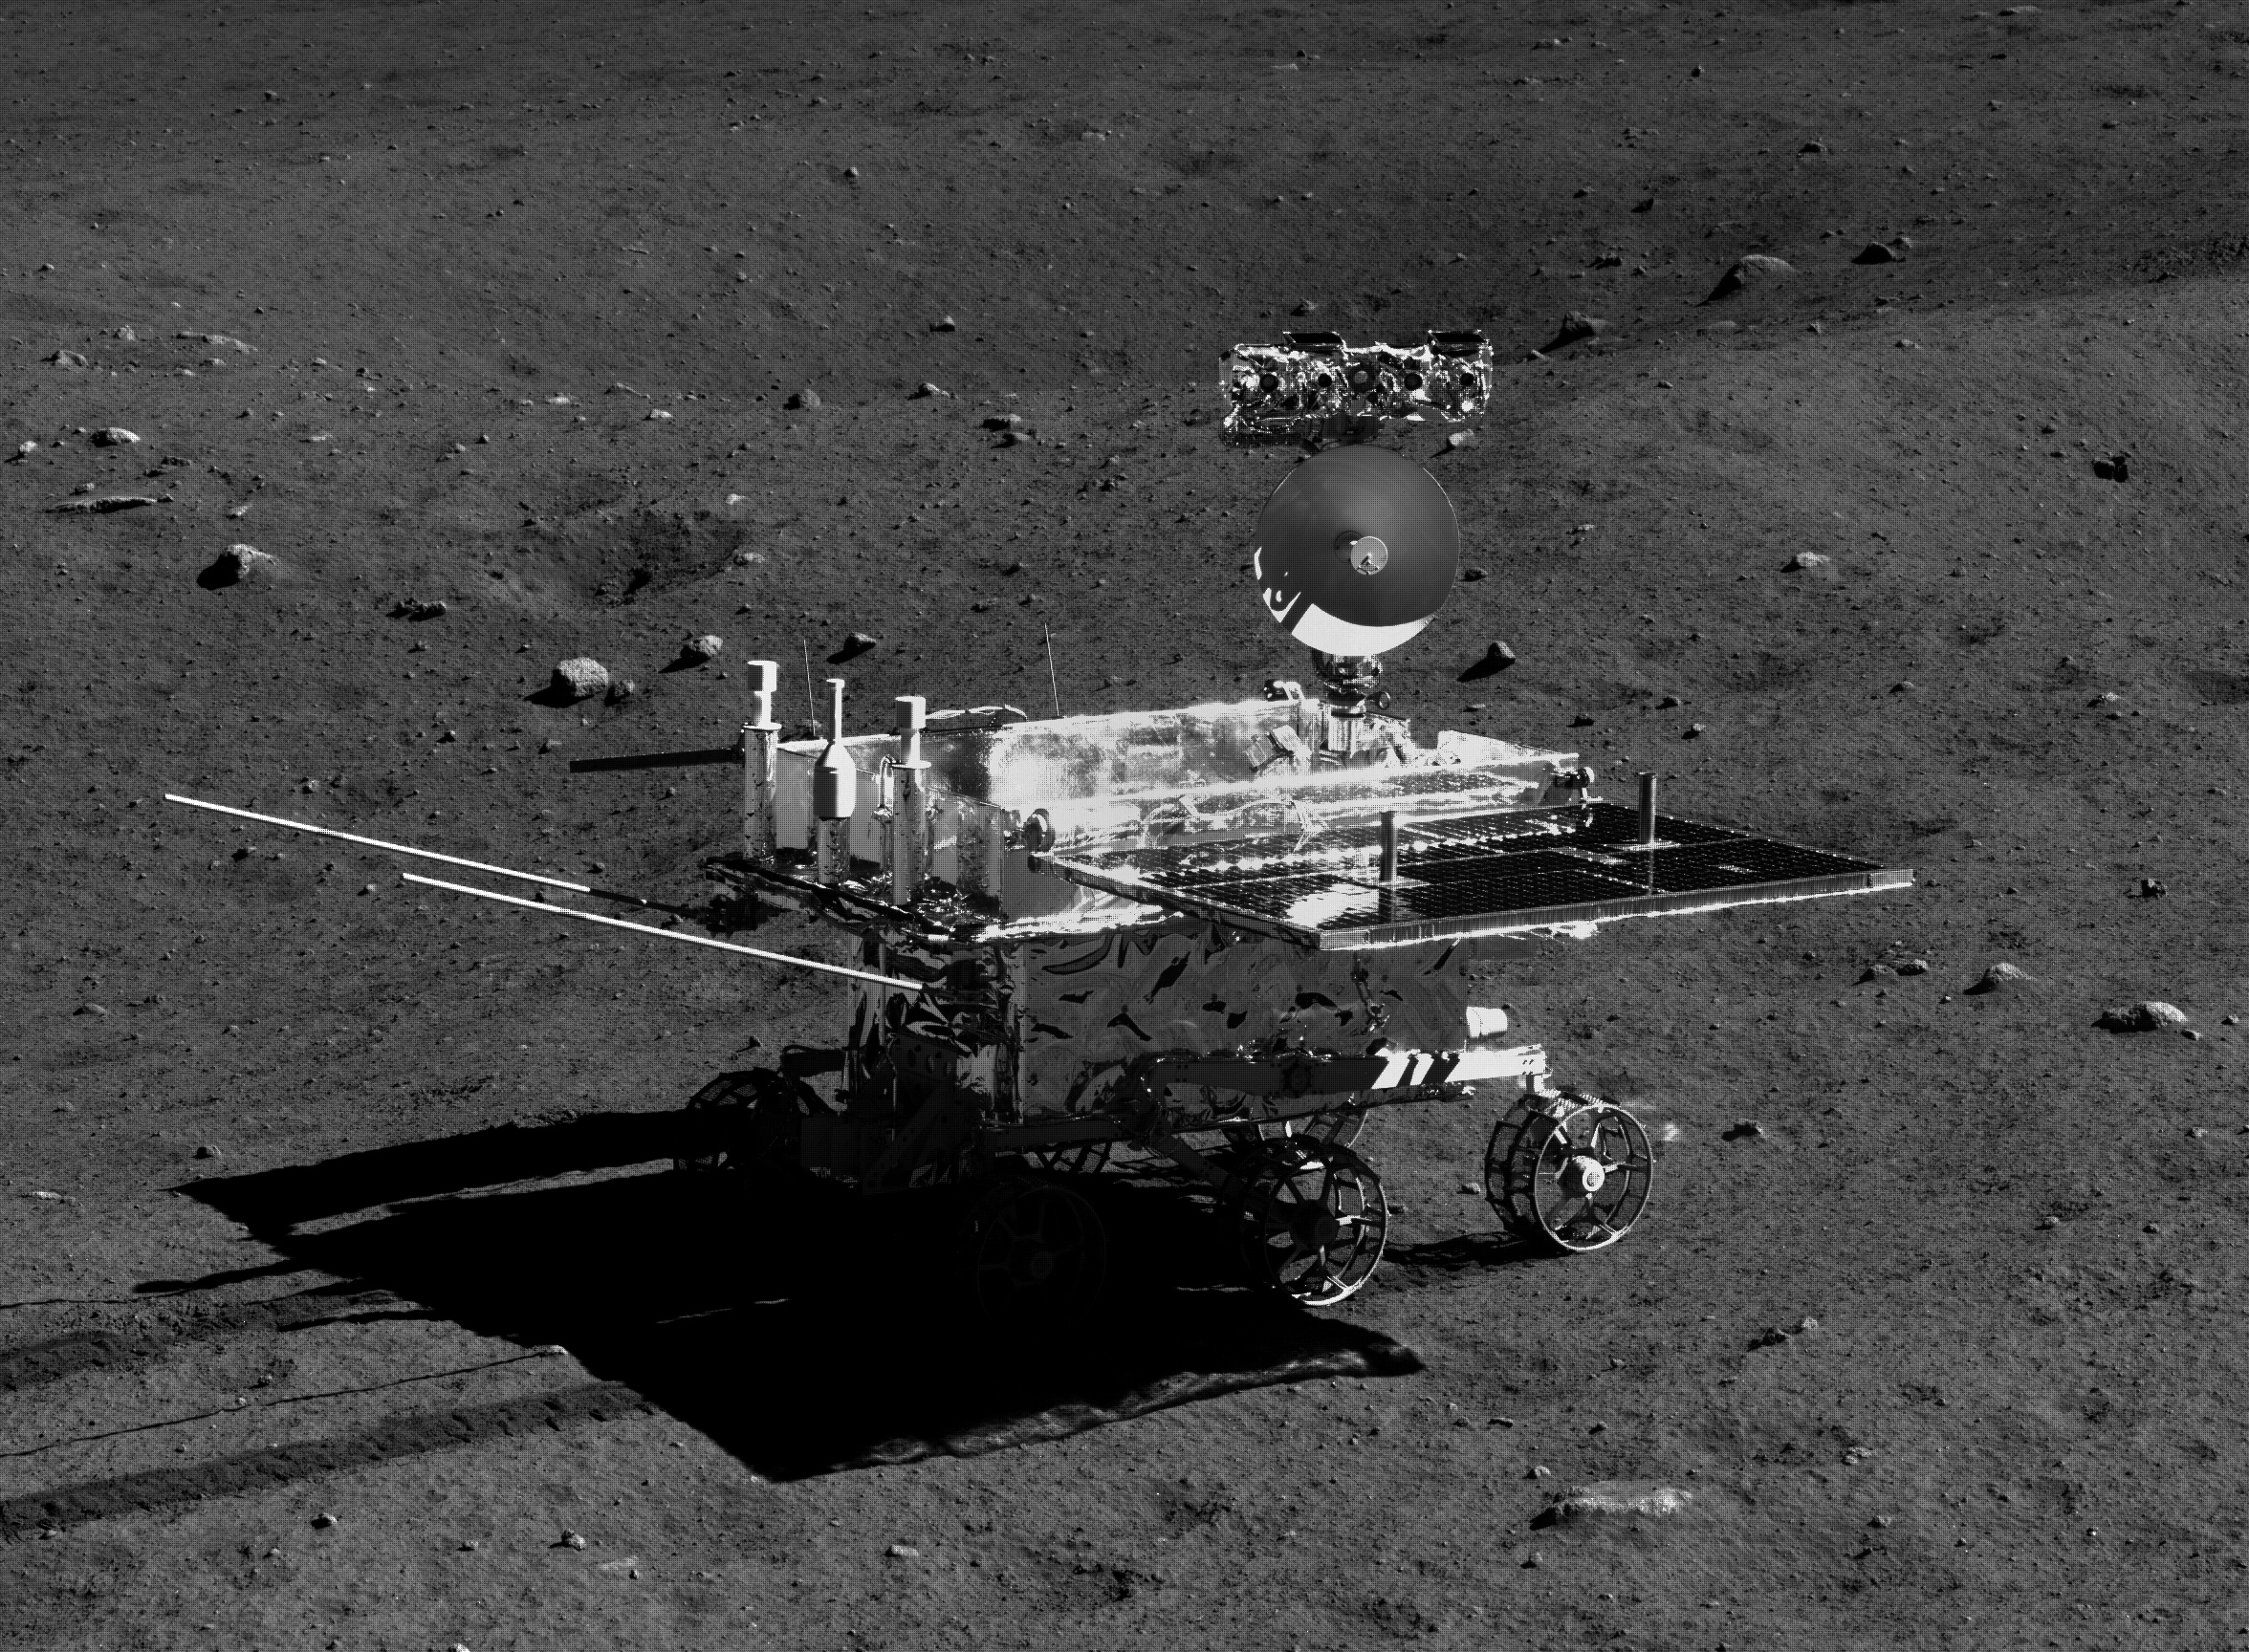 Rover Yutu on the Moon